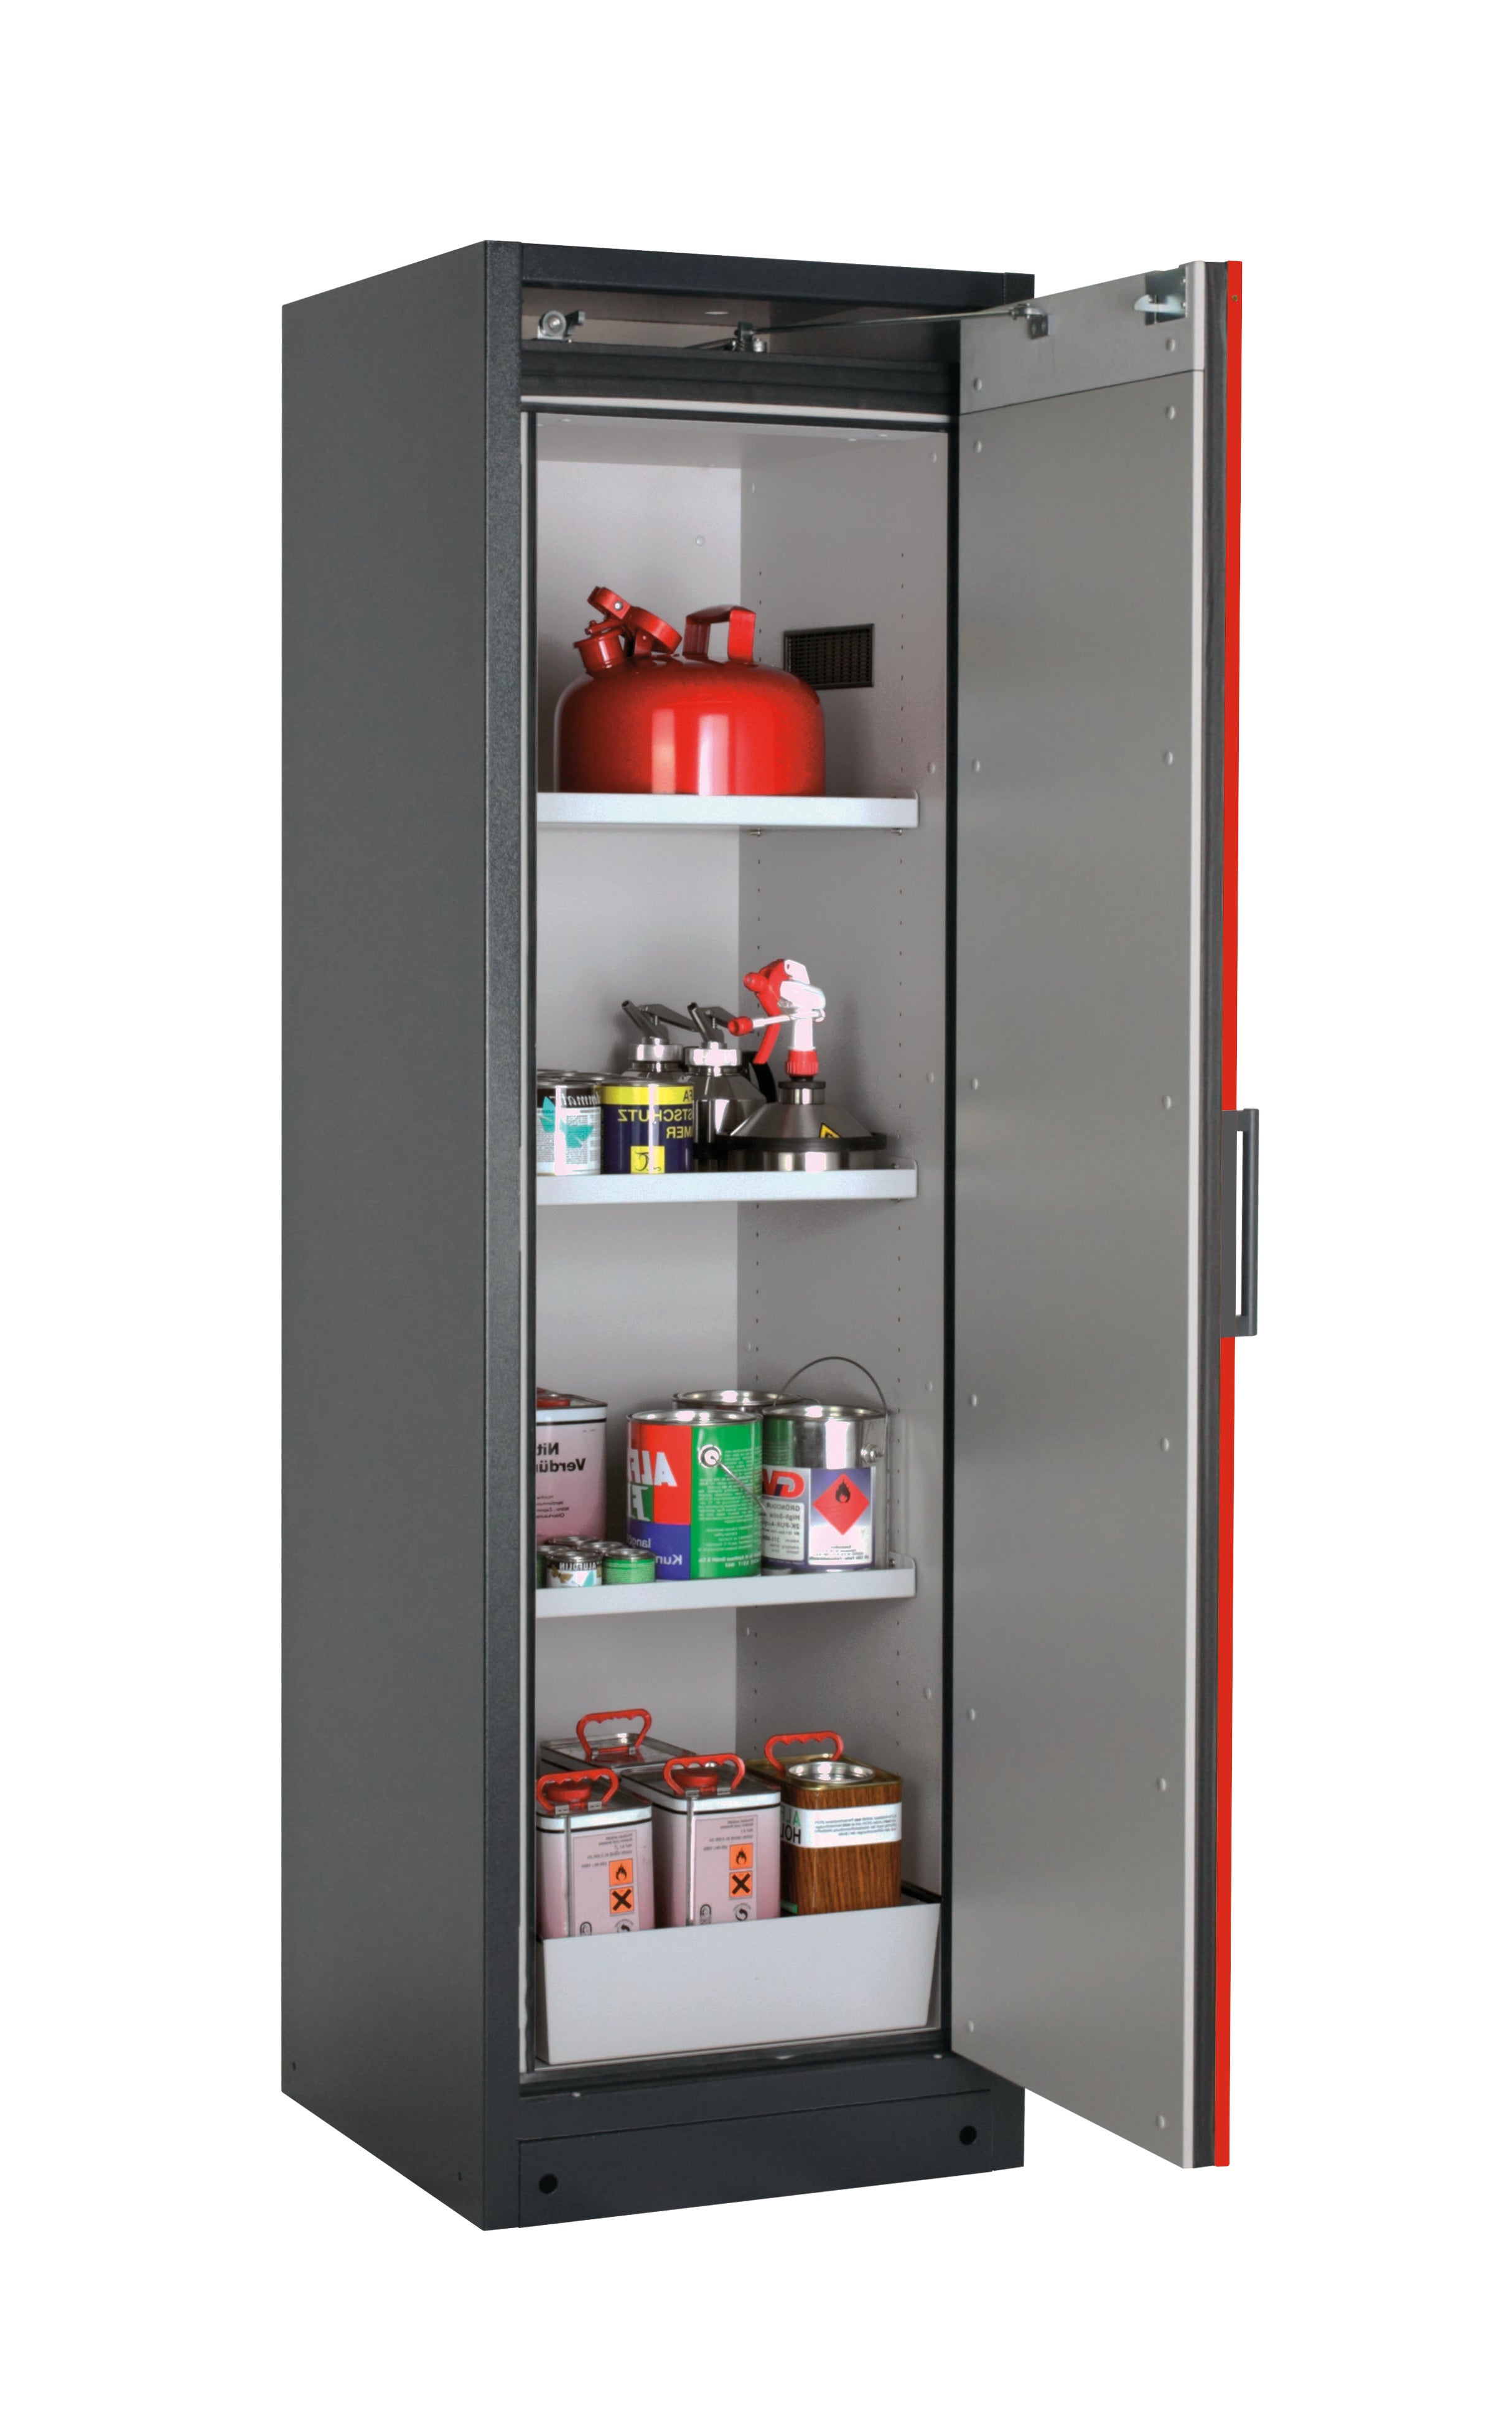 Type 90 safety storage cabinet Q-PEGASUS-90 model Q90.195.060.WDACR in traffic red RAL 3020 with 3x shelf standard (sheet steel),